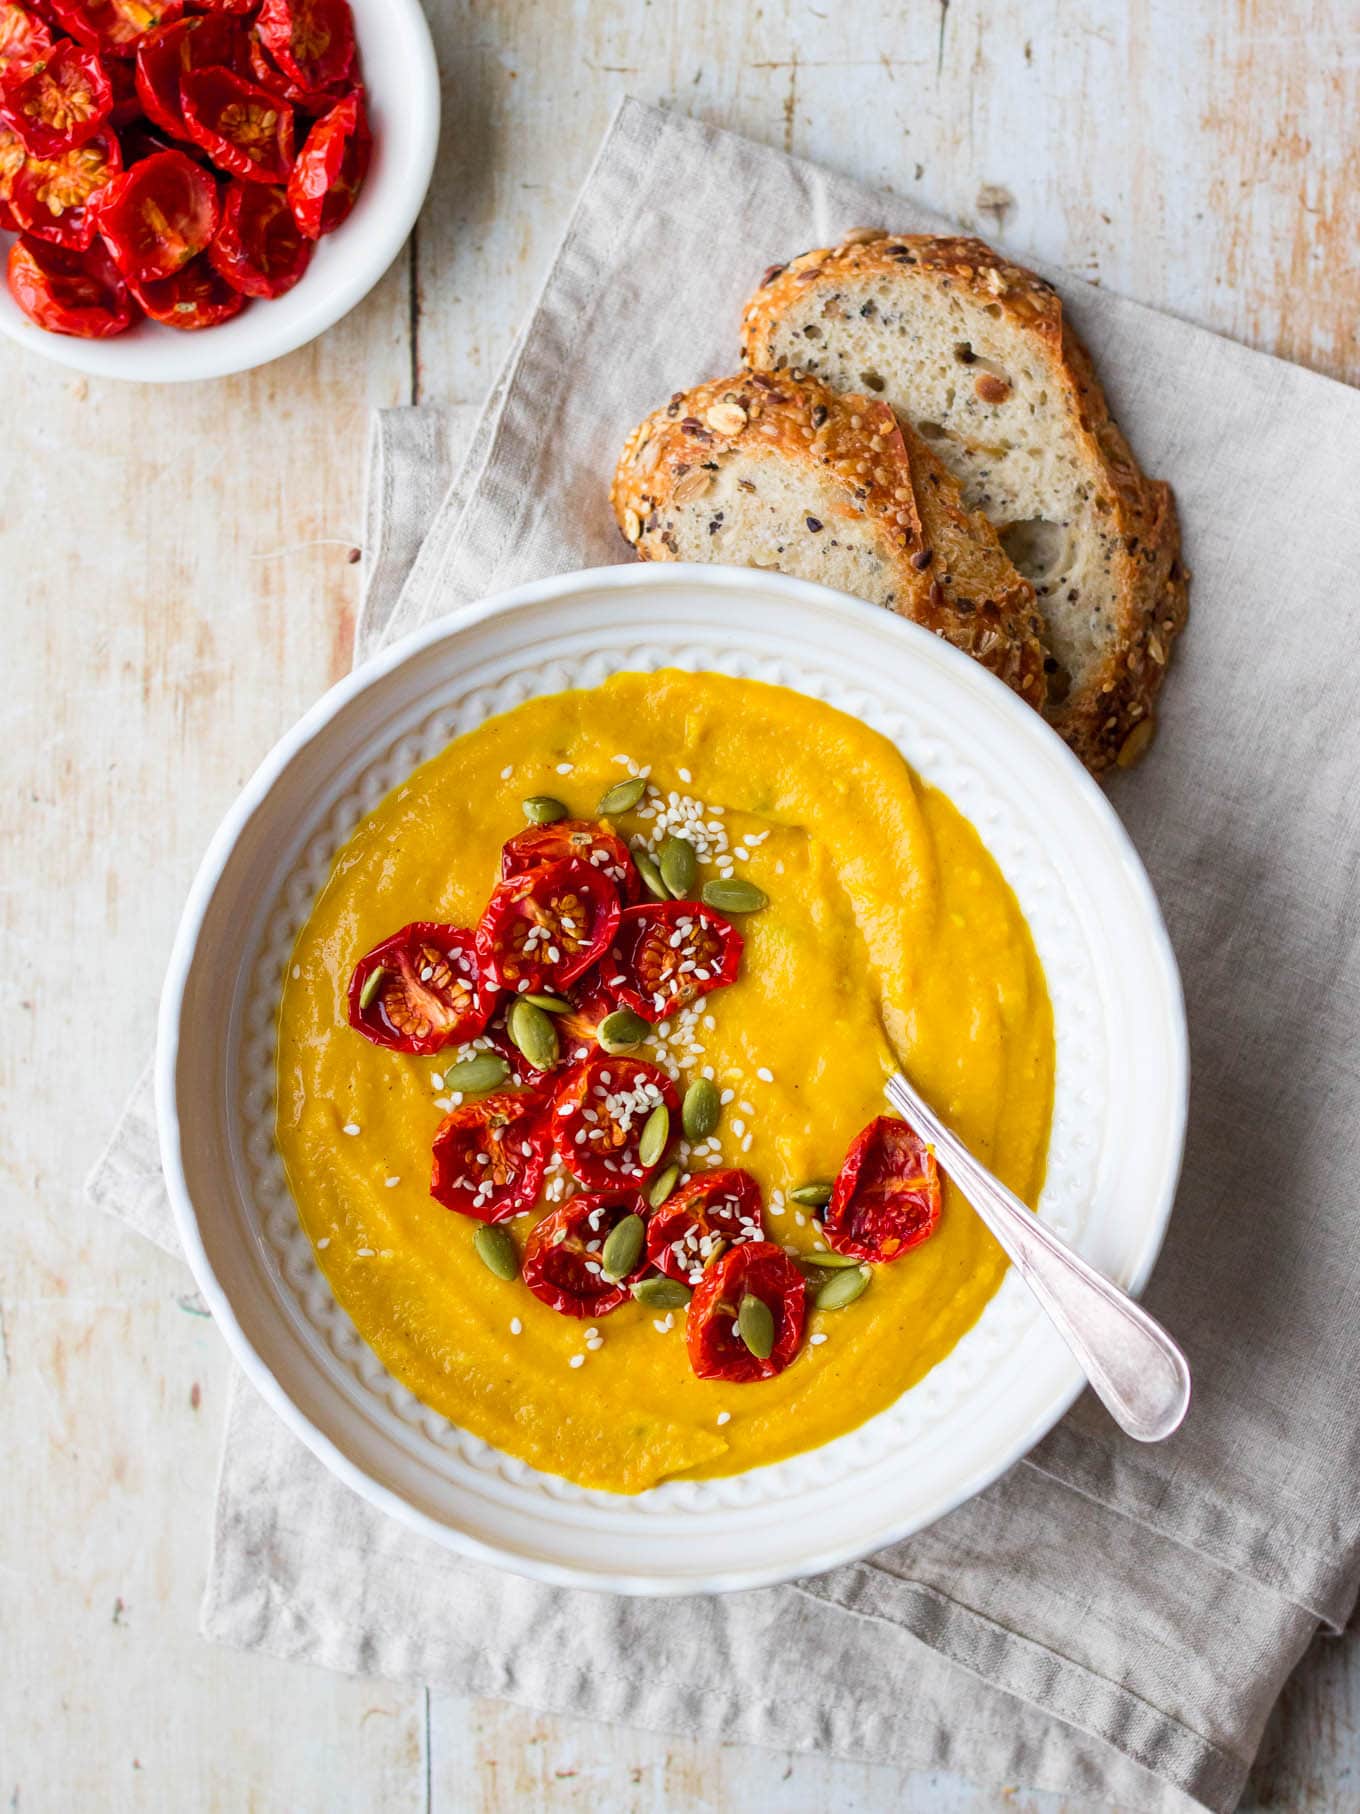 Cauliflower, sweet potato and red lentil soup with slow roasted tomatoes